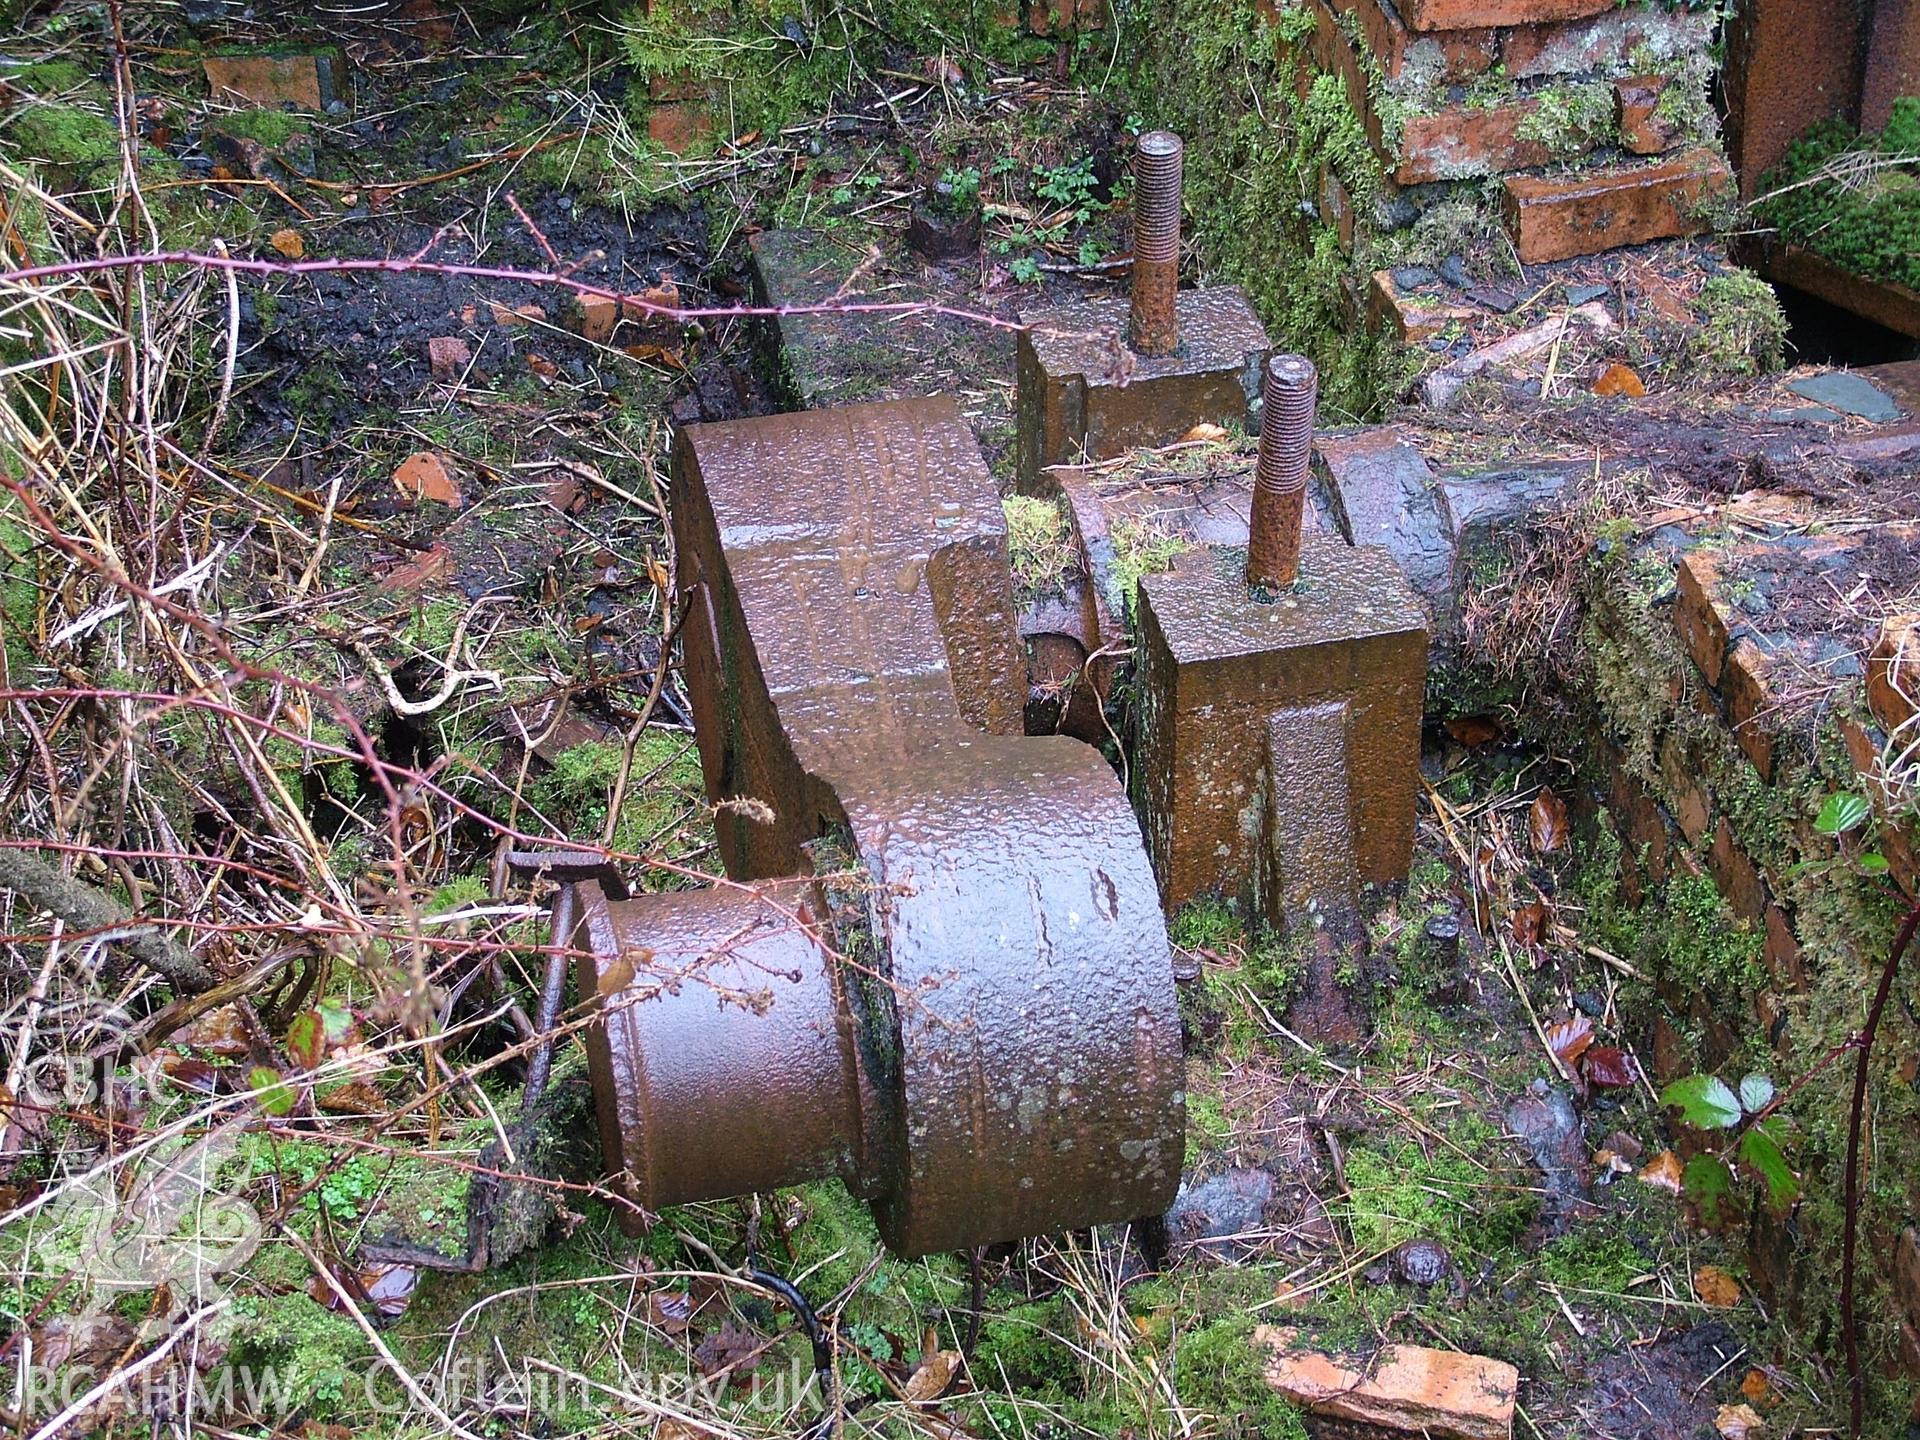 Close up of pumping and winding remains in situ.